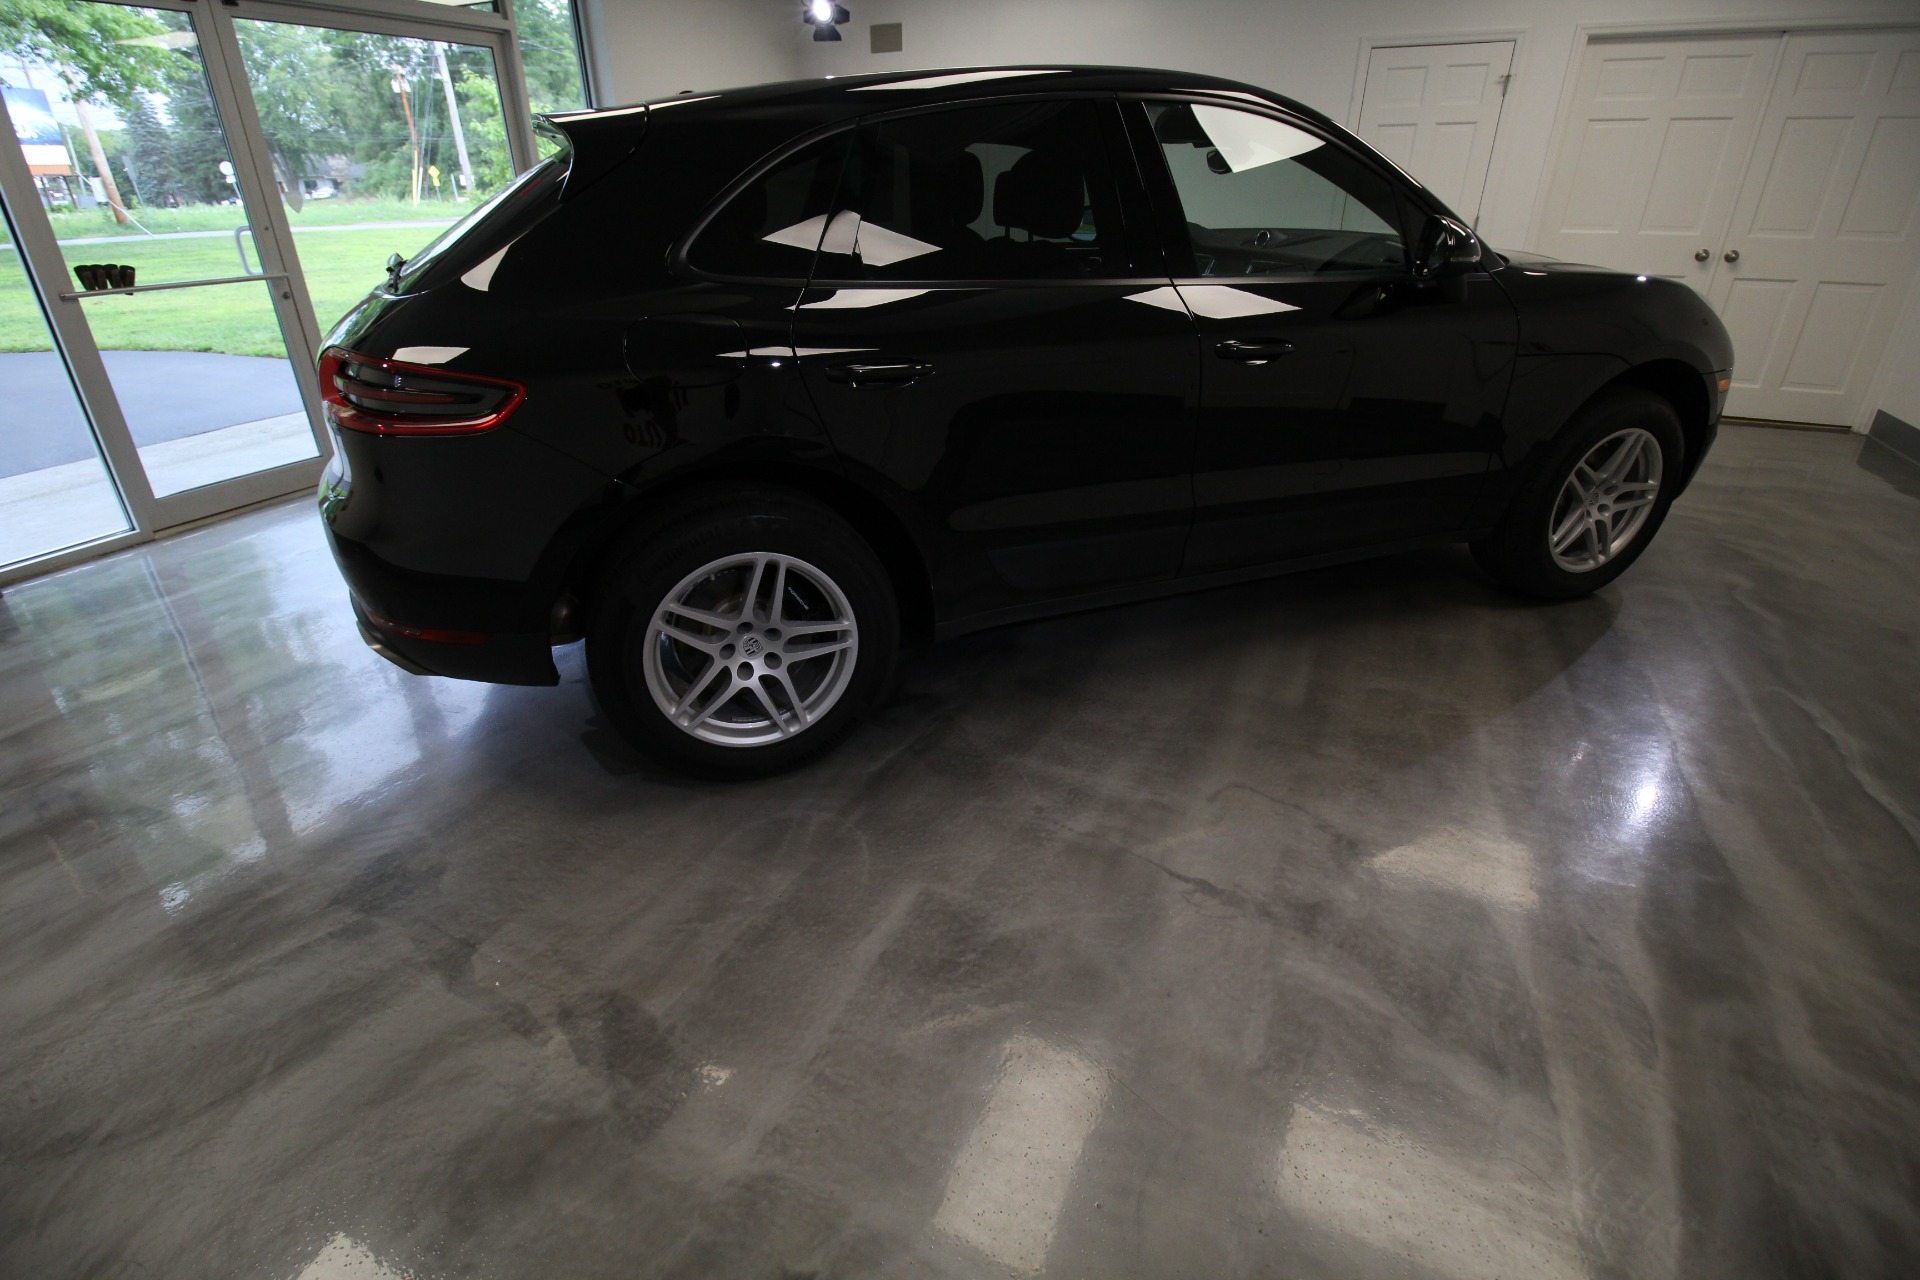 Used 2018 BLACK PORSCHE MACAN LOW MILES HARD TO FIND SUPER CLEAN | Albany, NY